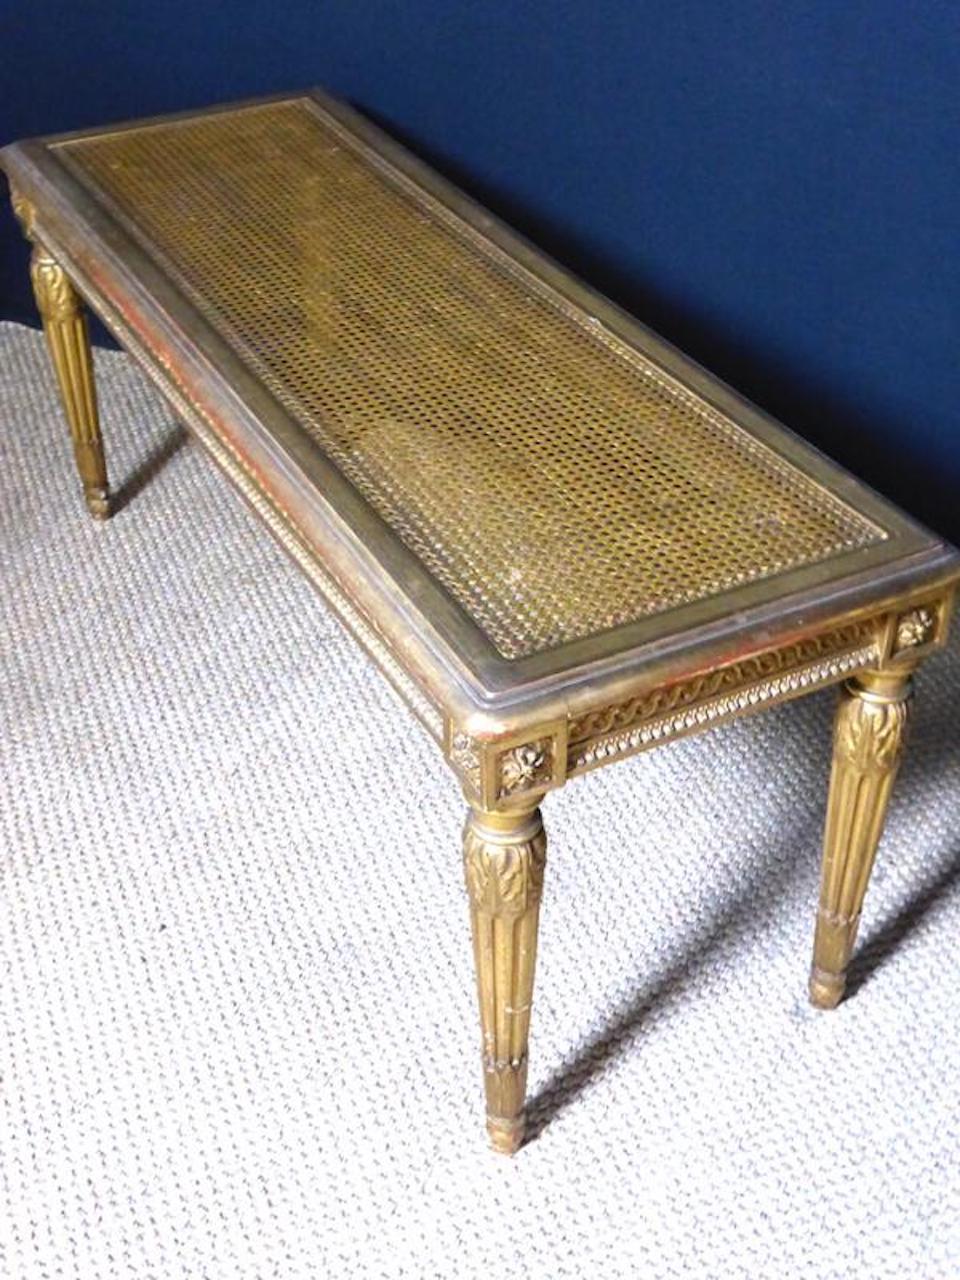 Beautiful 20th century French Louis XVI style caned bench.
Golden wood. Very good condition.
Good quality.